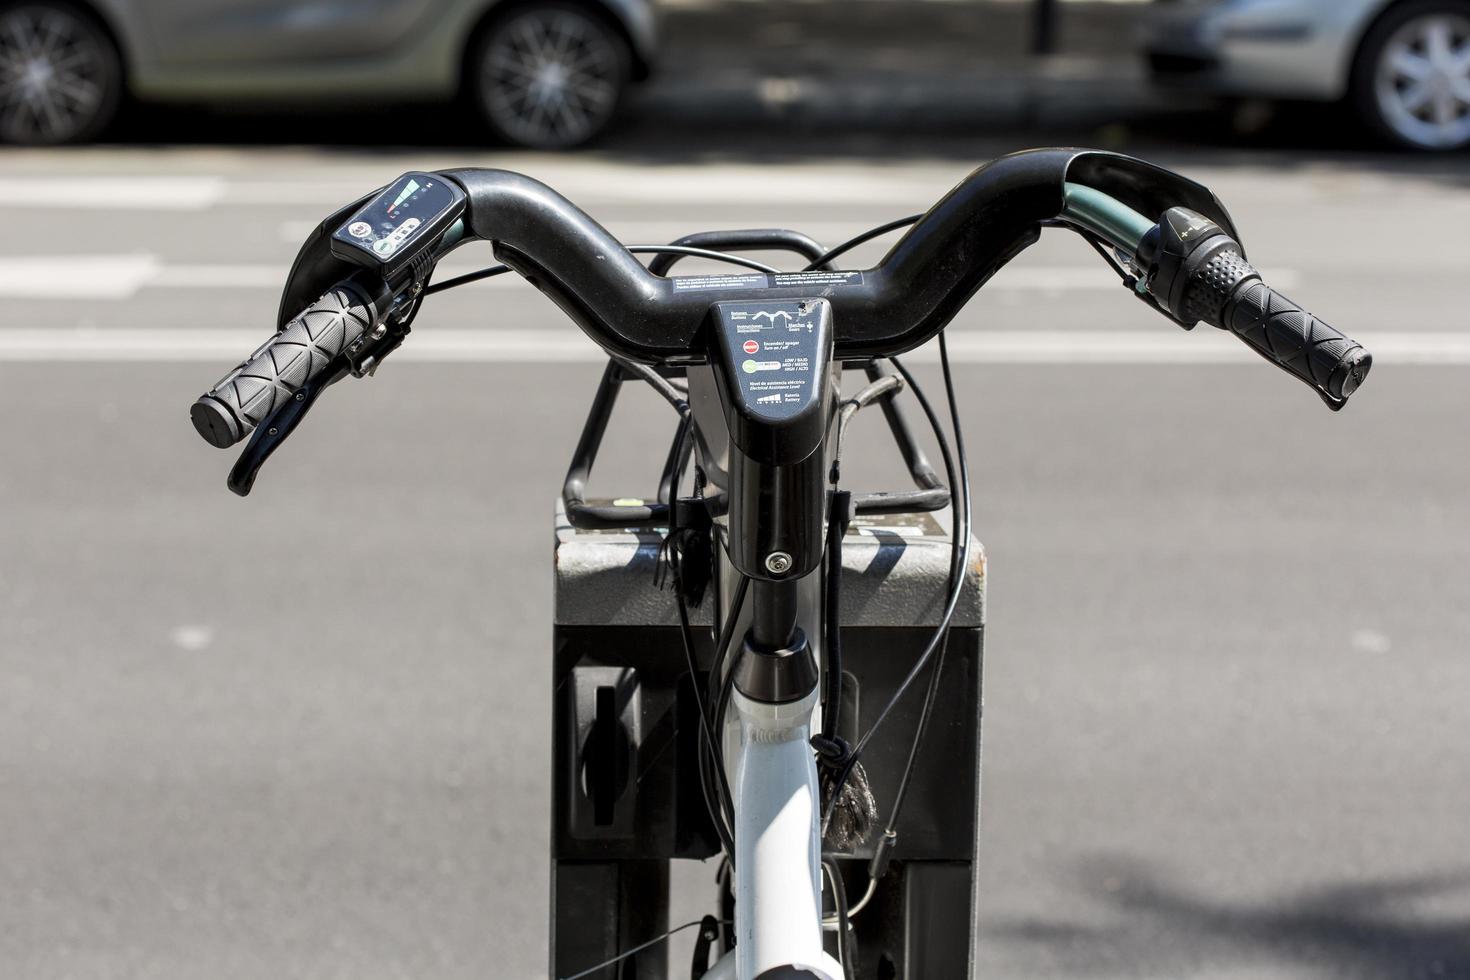 Details of the handlebars of an electric bike in charge at its rental station, Madrid, Spain photo